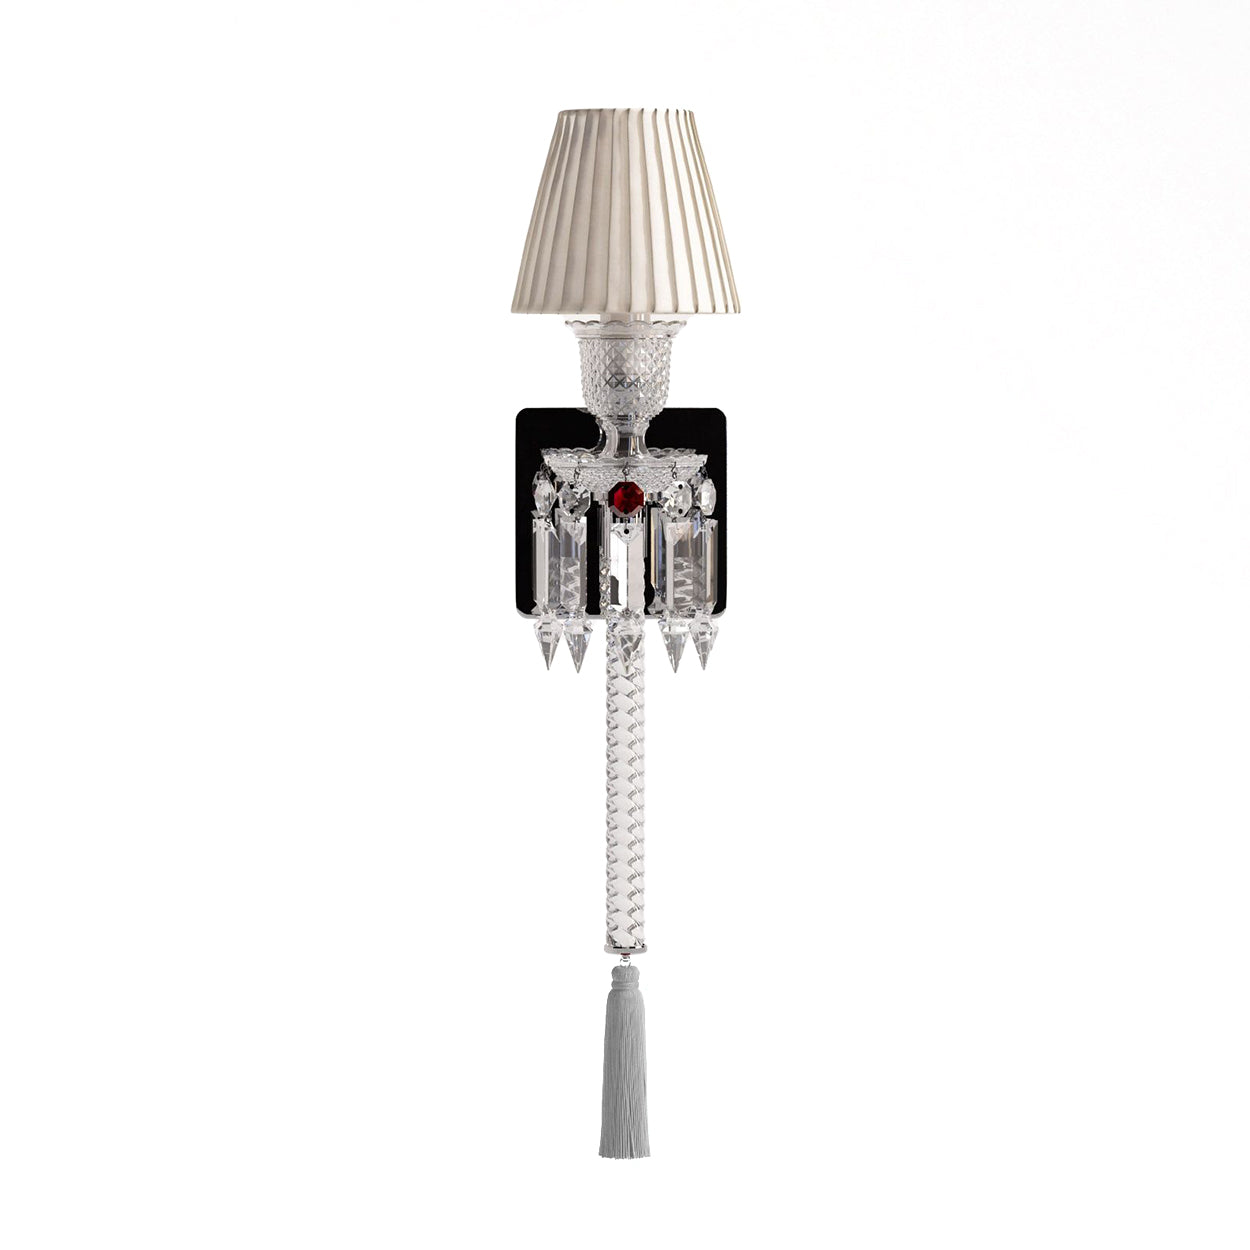 ANKUR BACCA TORCH WALL SCONCE LIGHT